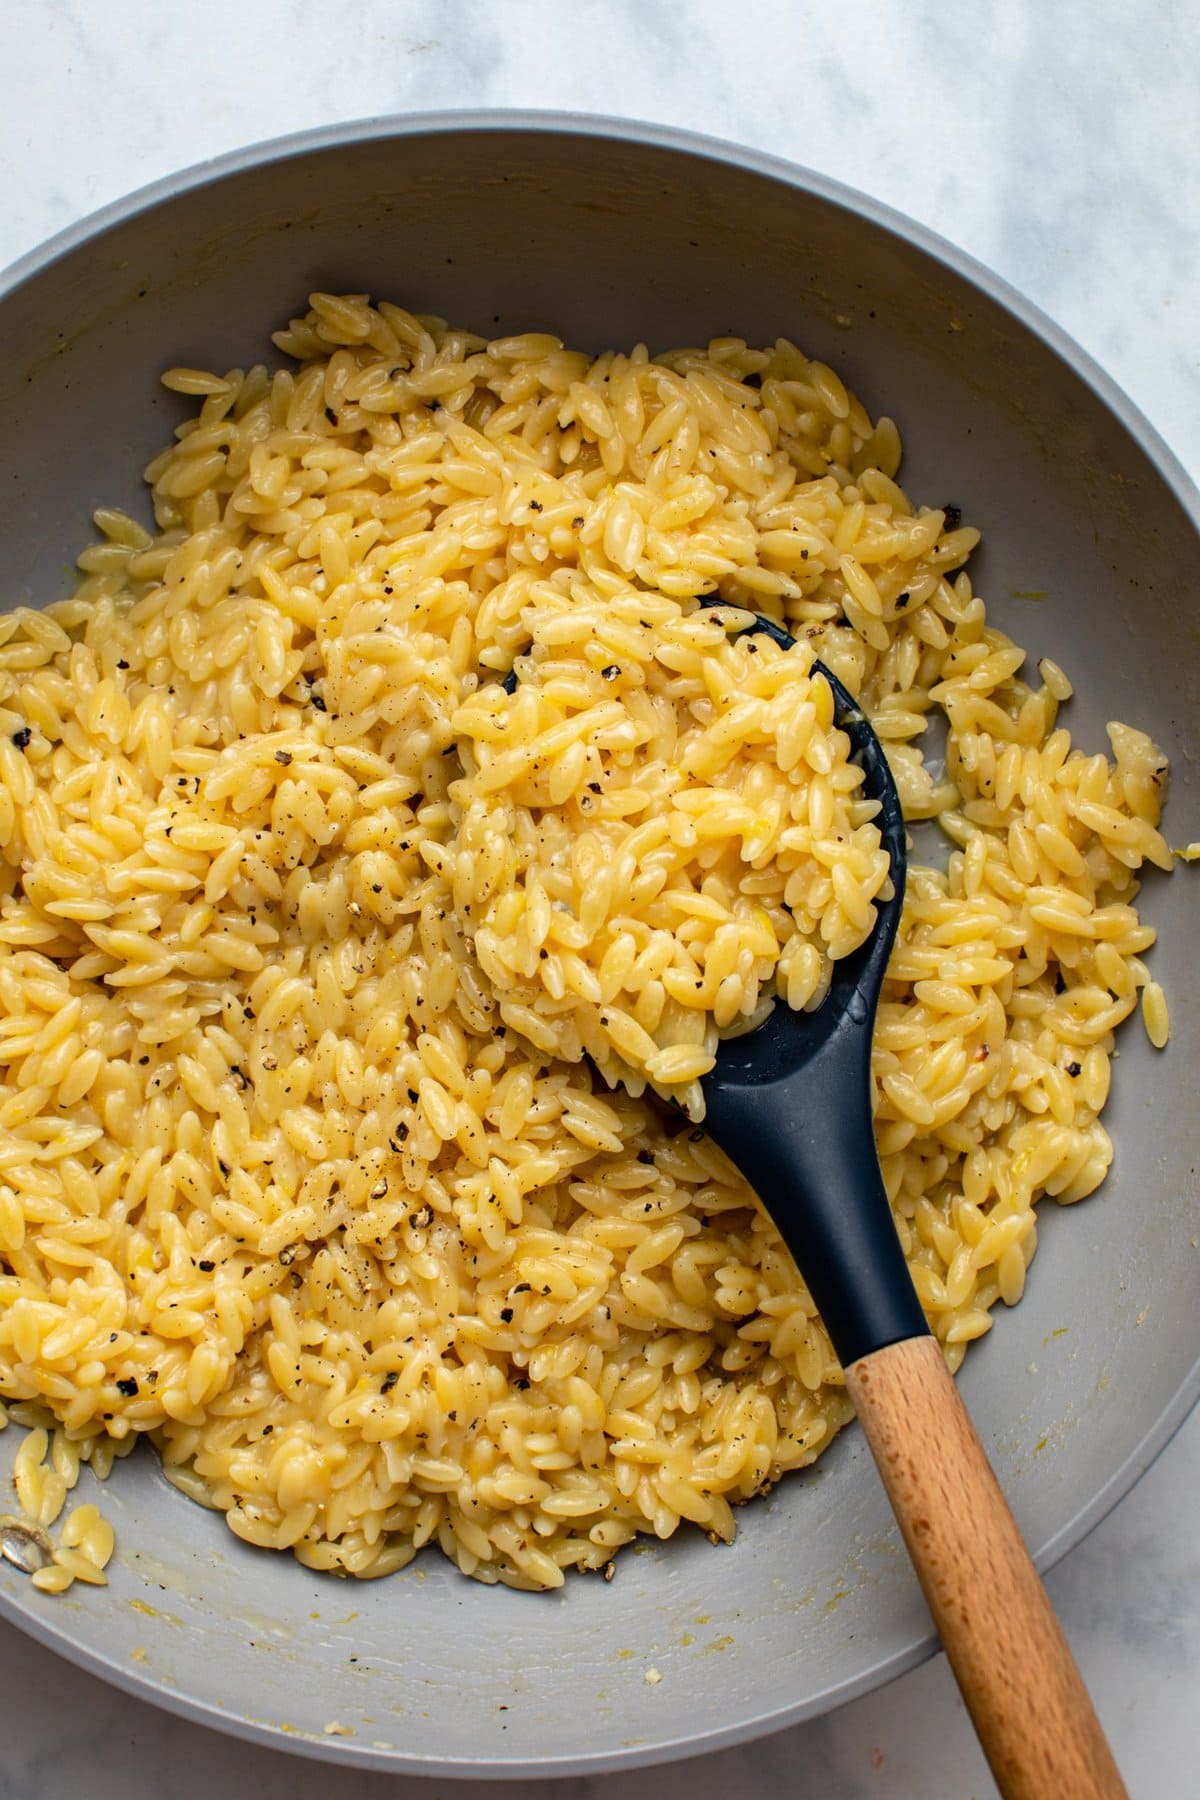 lemon pepper orzo in sauté pan with wooden spoon